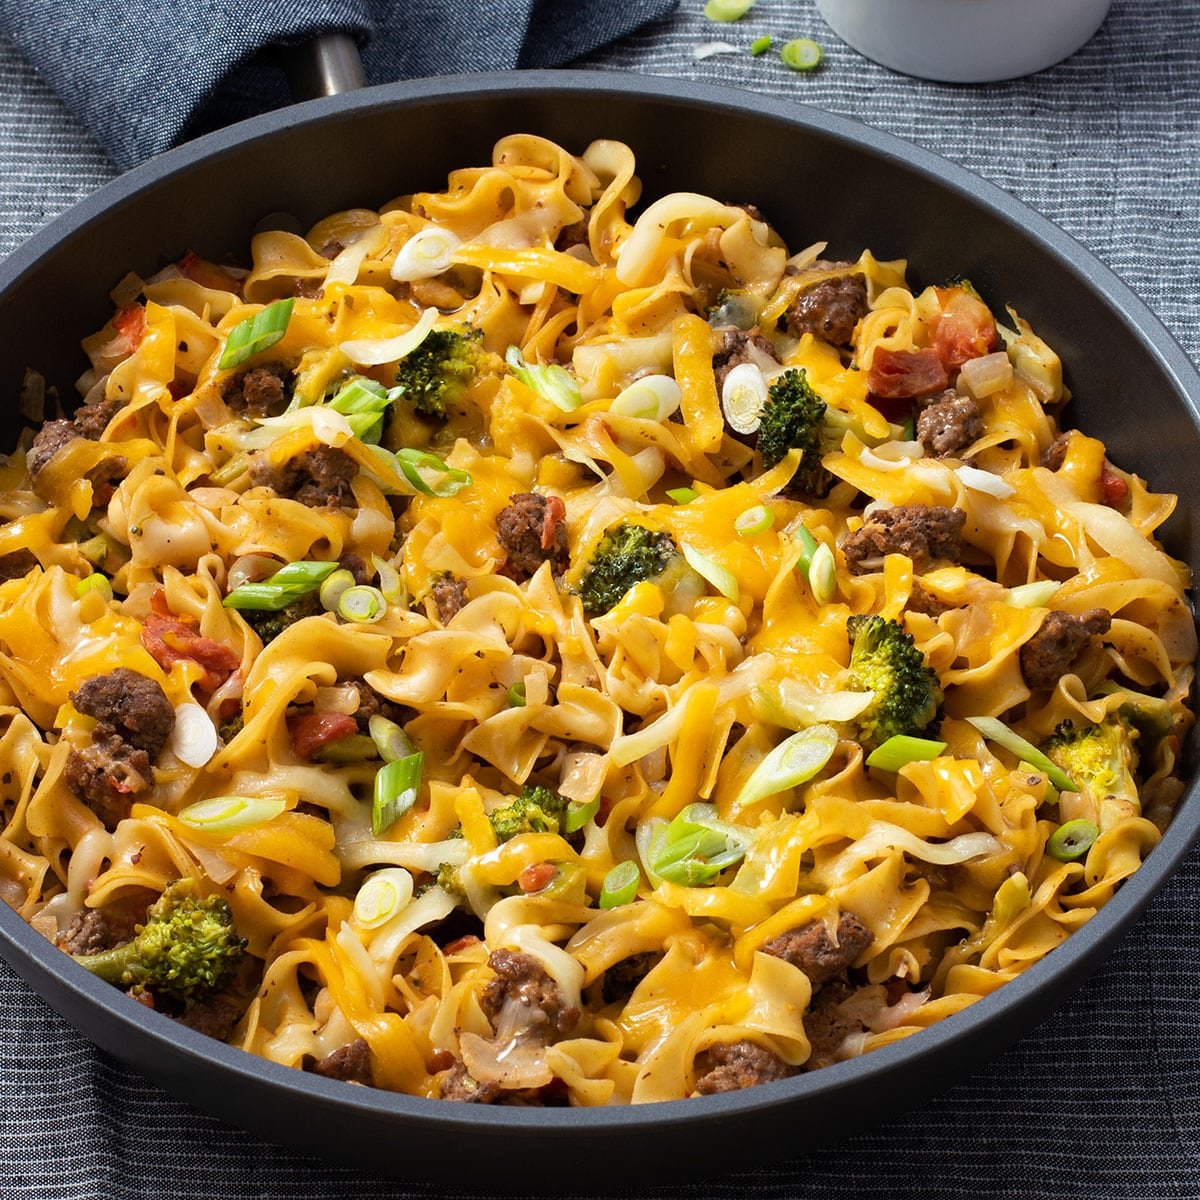 A large skillet with egg noodles, broccoli, and ground beef all cooked up and topped with cheddar cheese and green onion